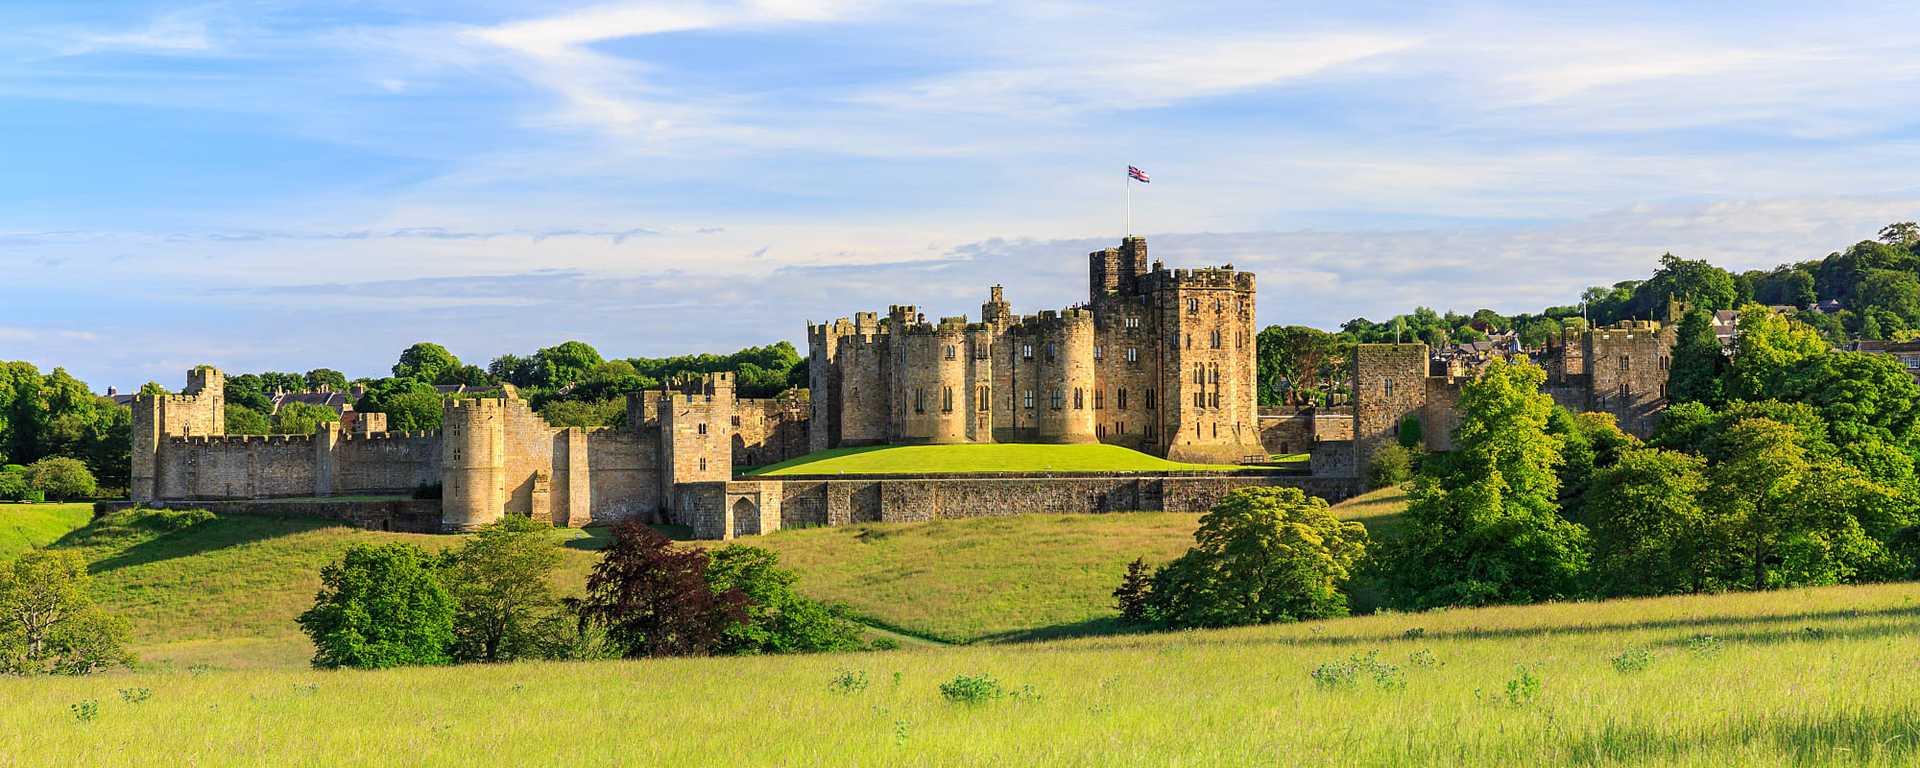 Alnwick Castle, filming location for Harry Potter, in Northumberland, England